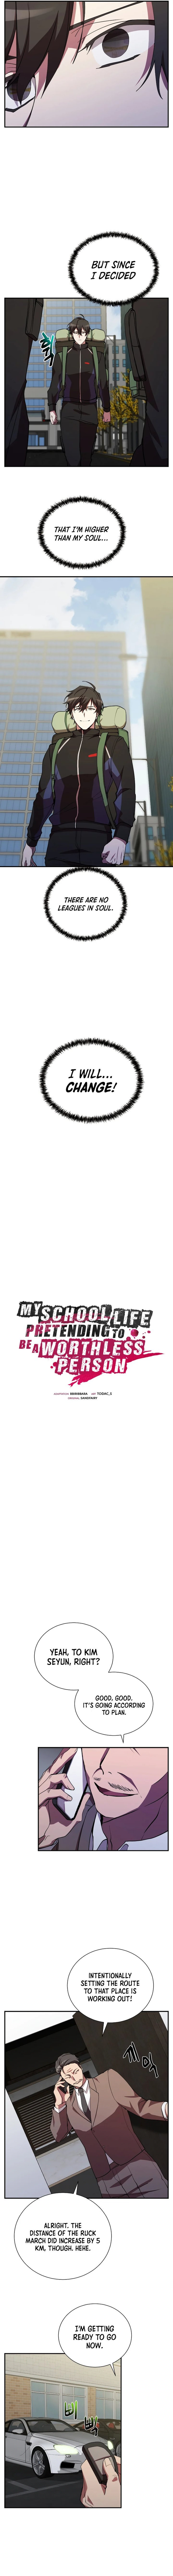 My School Life Pretending To Be A Worthless Person 30 4